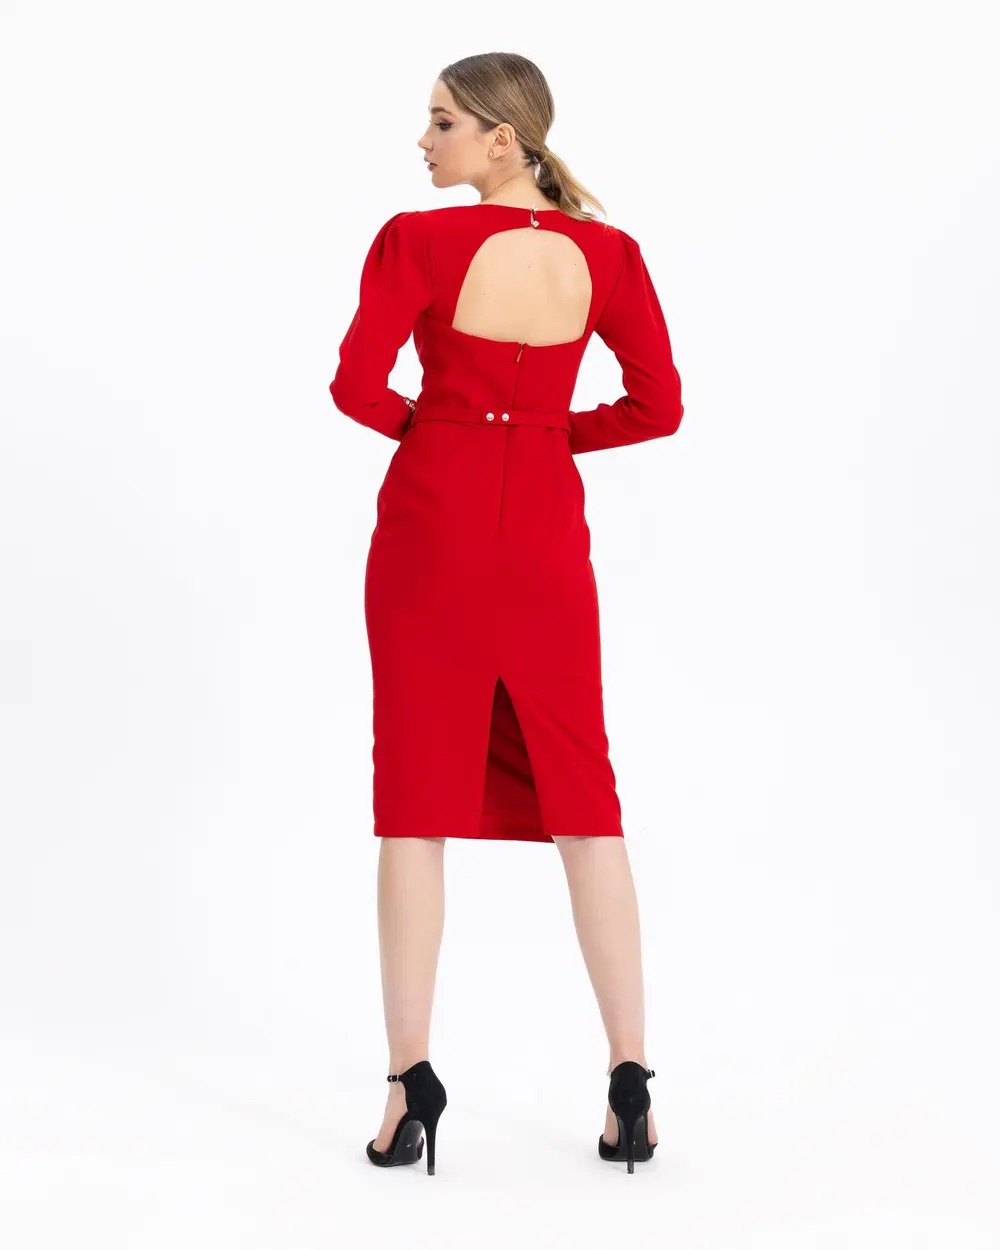 BELTED SQUARE COLLAR NARROW FORM EVENING DRESS